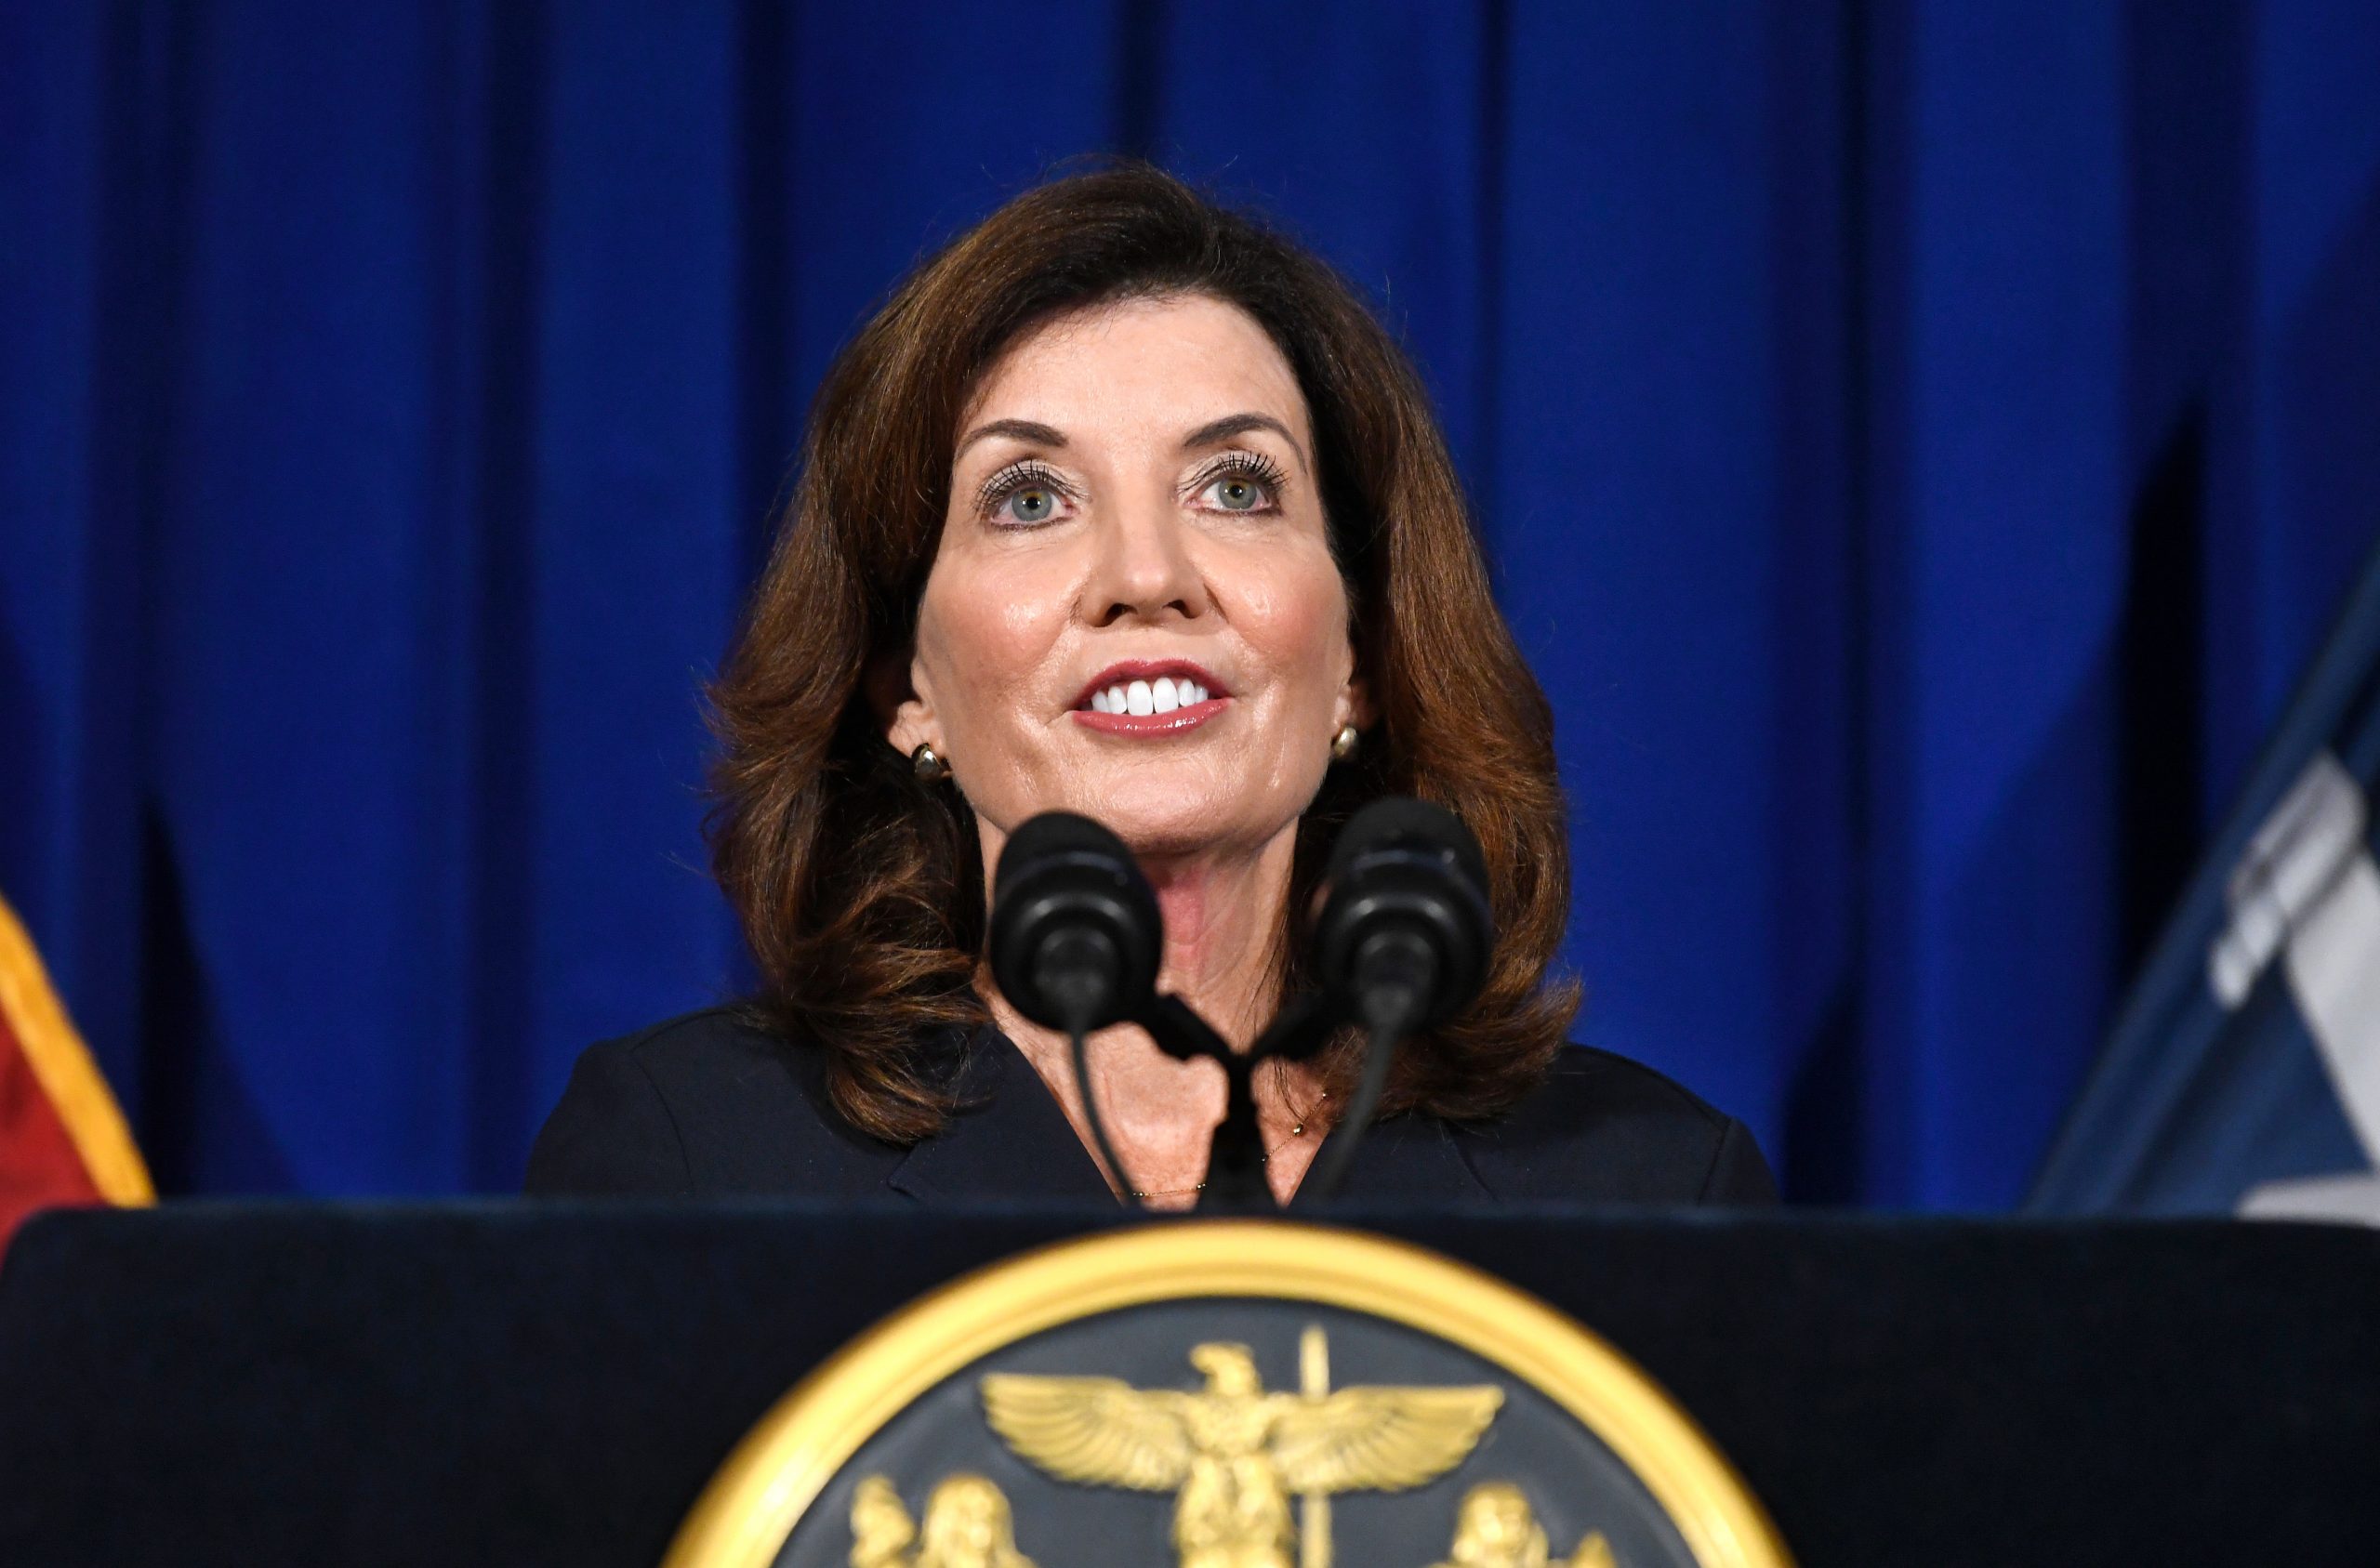 New York Governor Kathy Hochul to mandate masks in schools